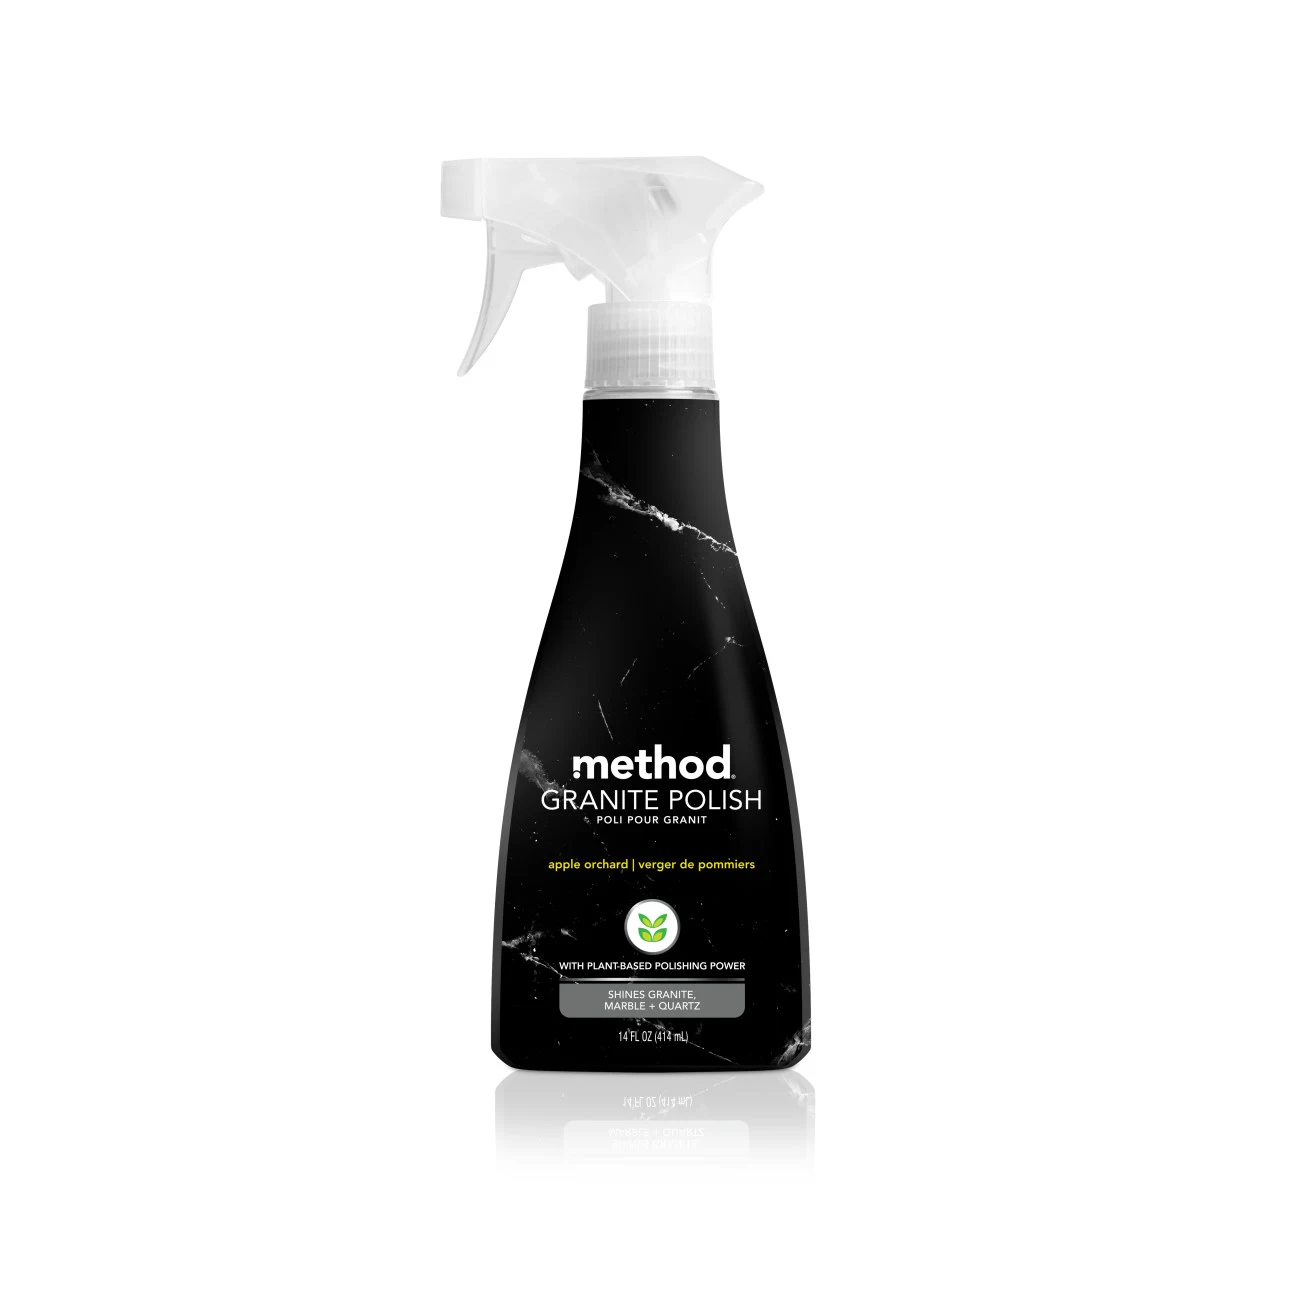 Method Granite Polish is packaged in a bottle made from 100% recycled materials.